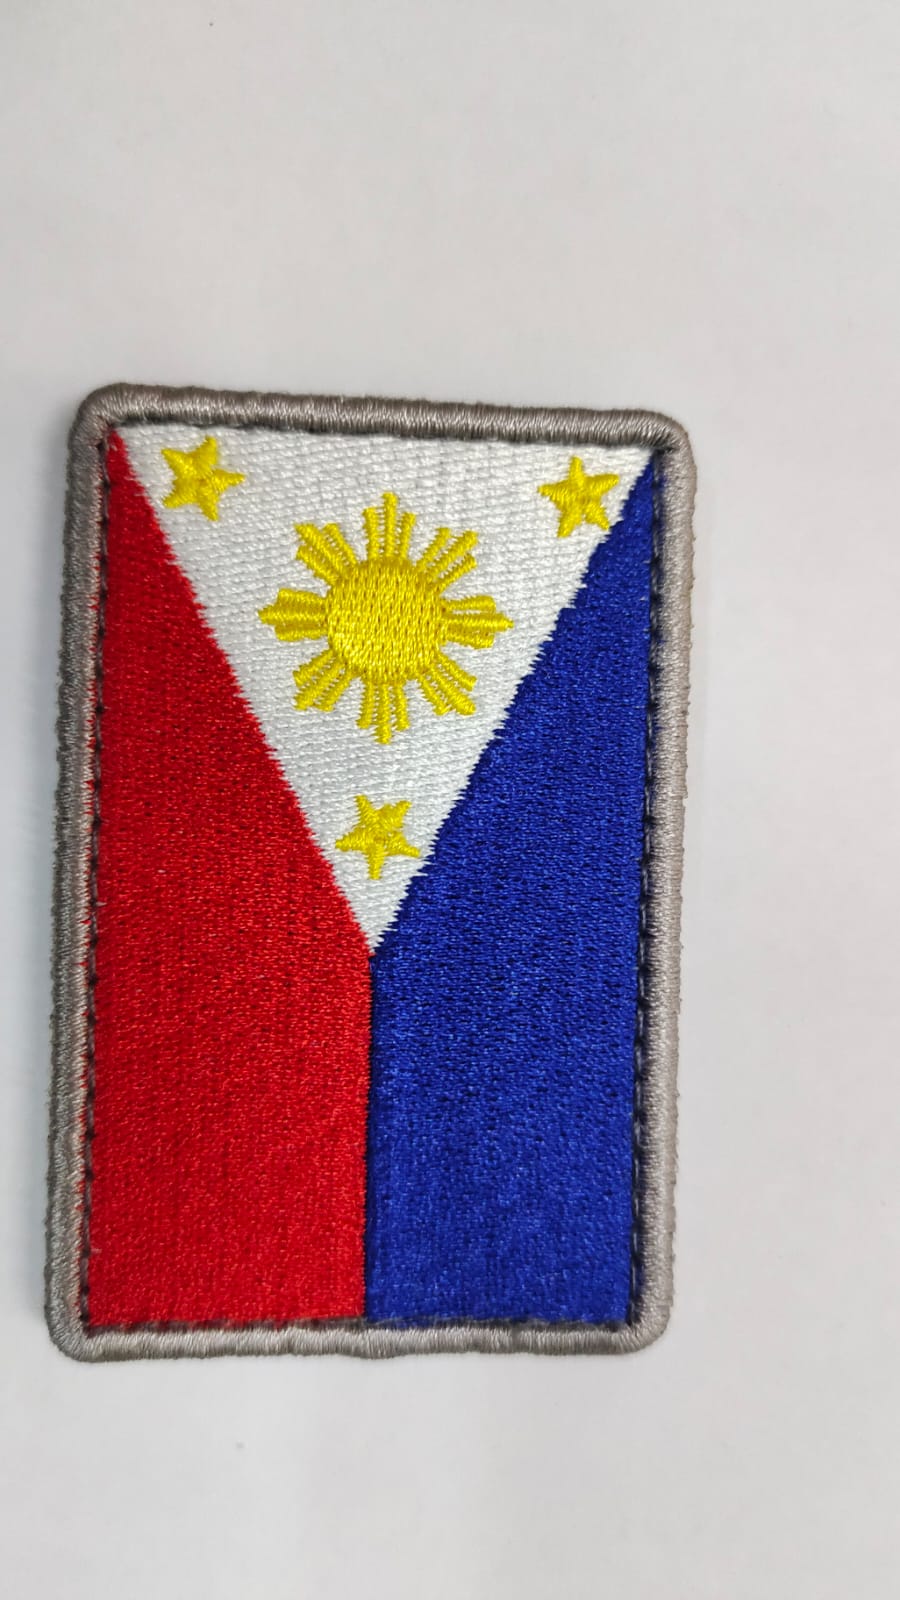 Missions - Embroidery Philippine Flag Patch